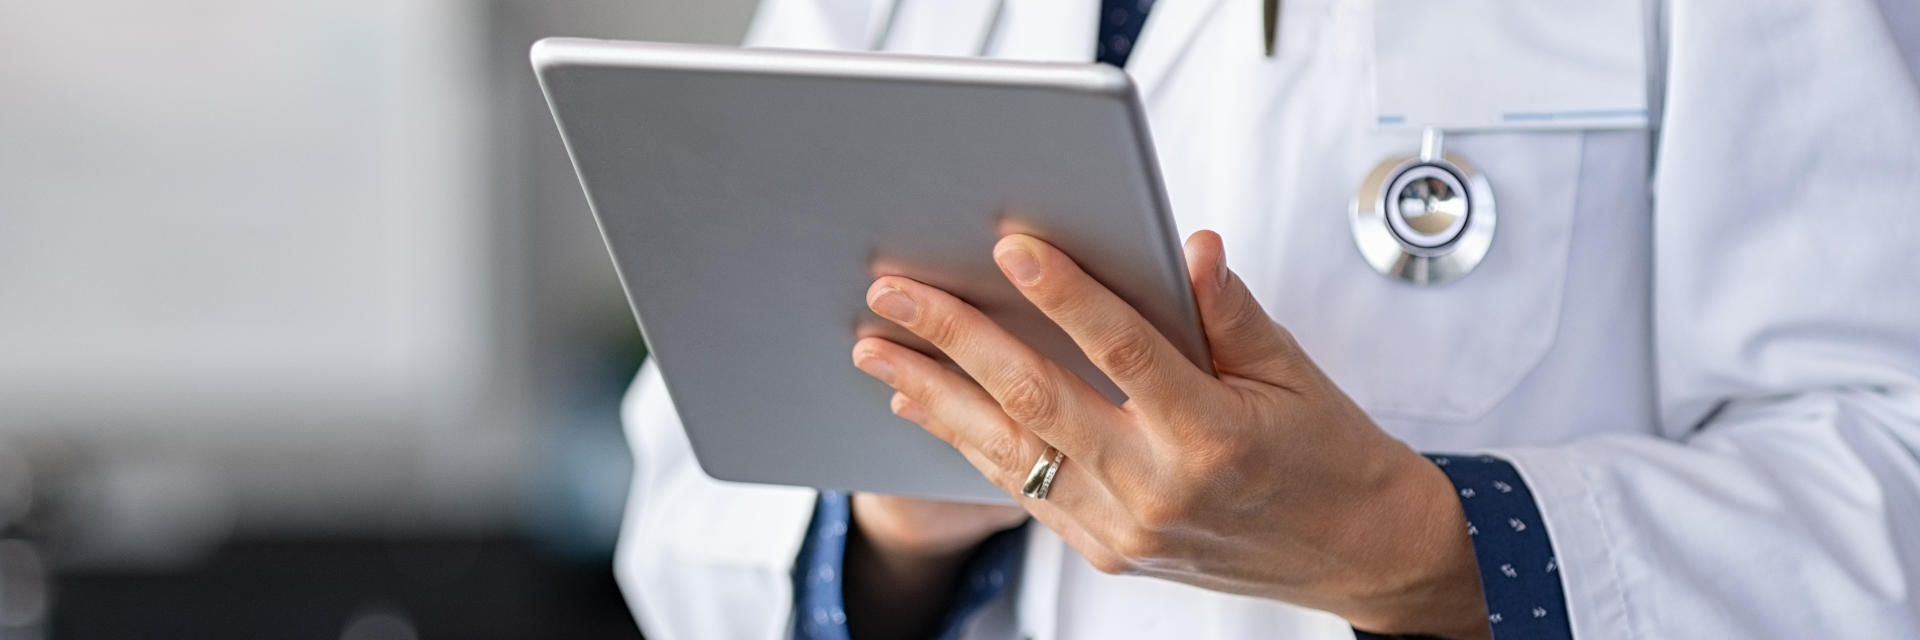 Primary care physician checking medical records on a tablet.